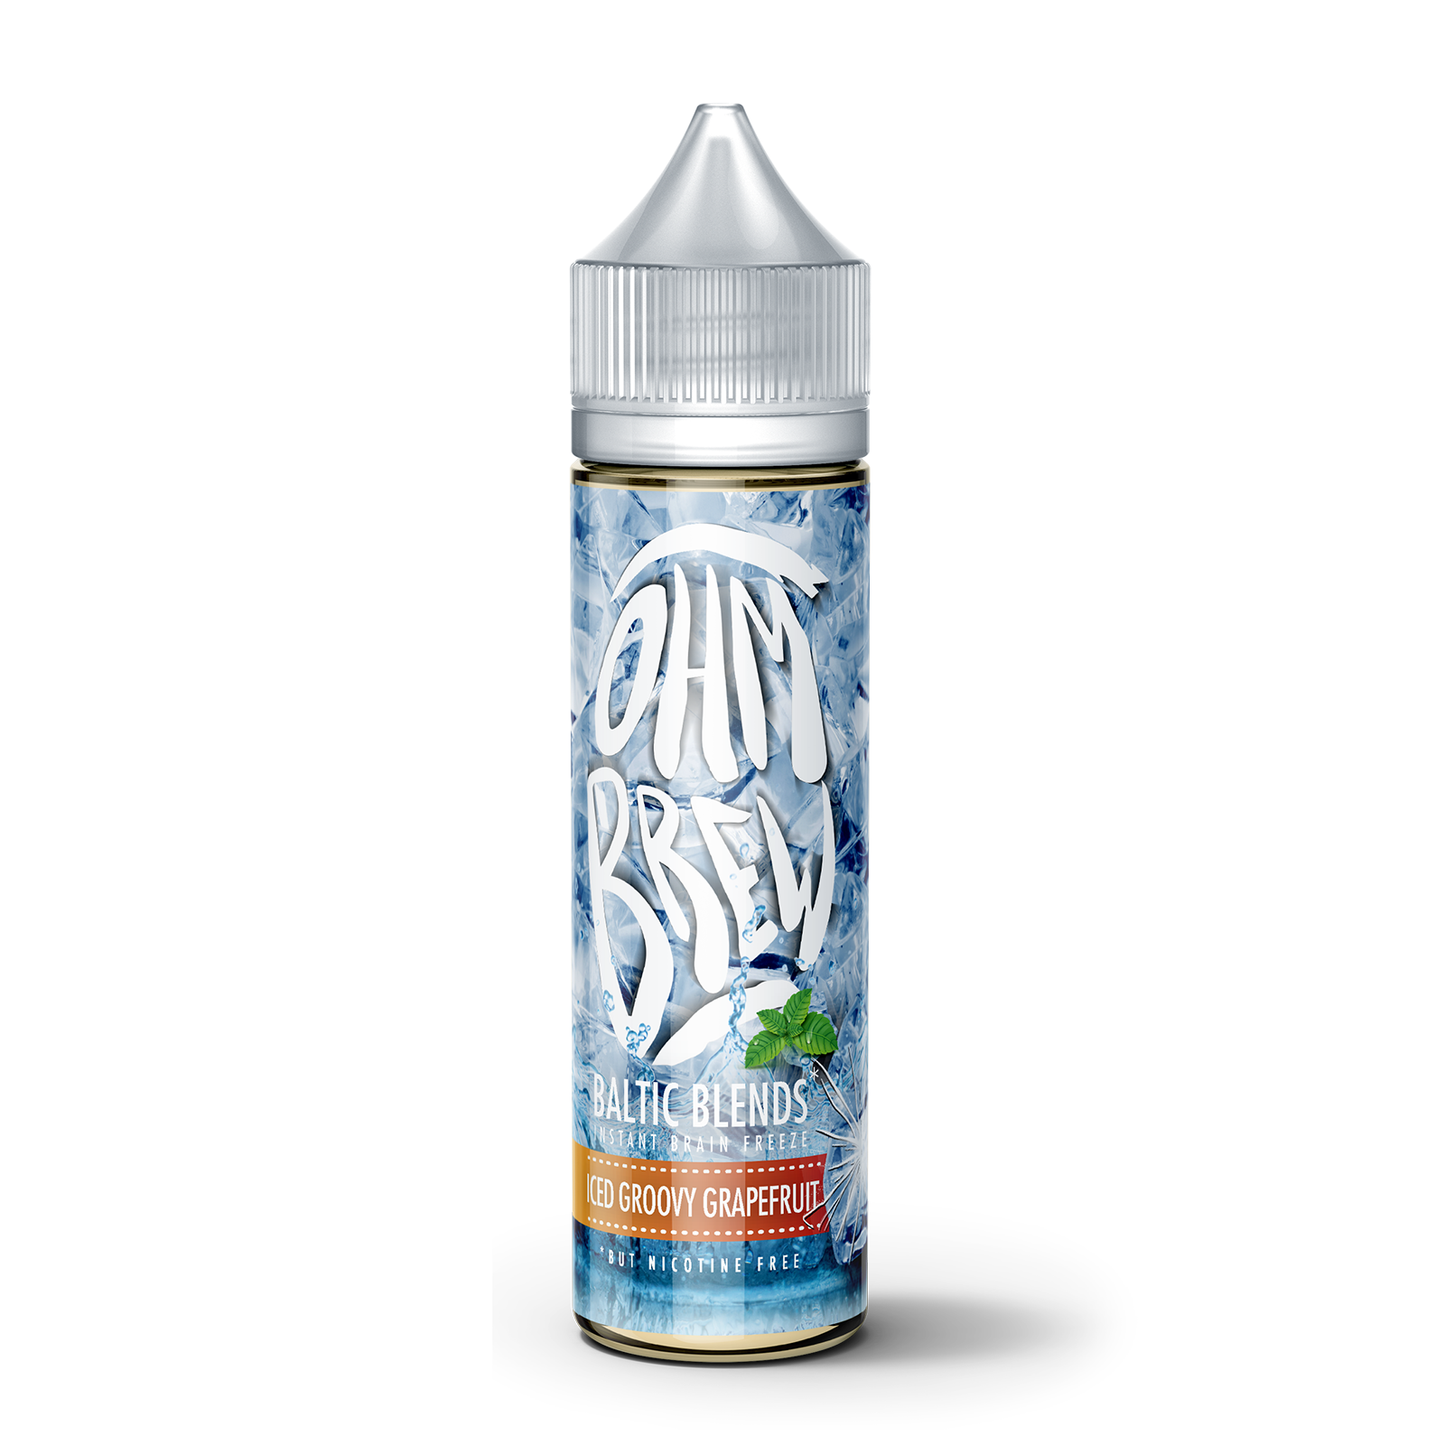 Ohm Brew Baltic Blends Iced Groovy Grapefruit - 50ml